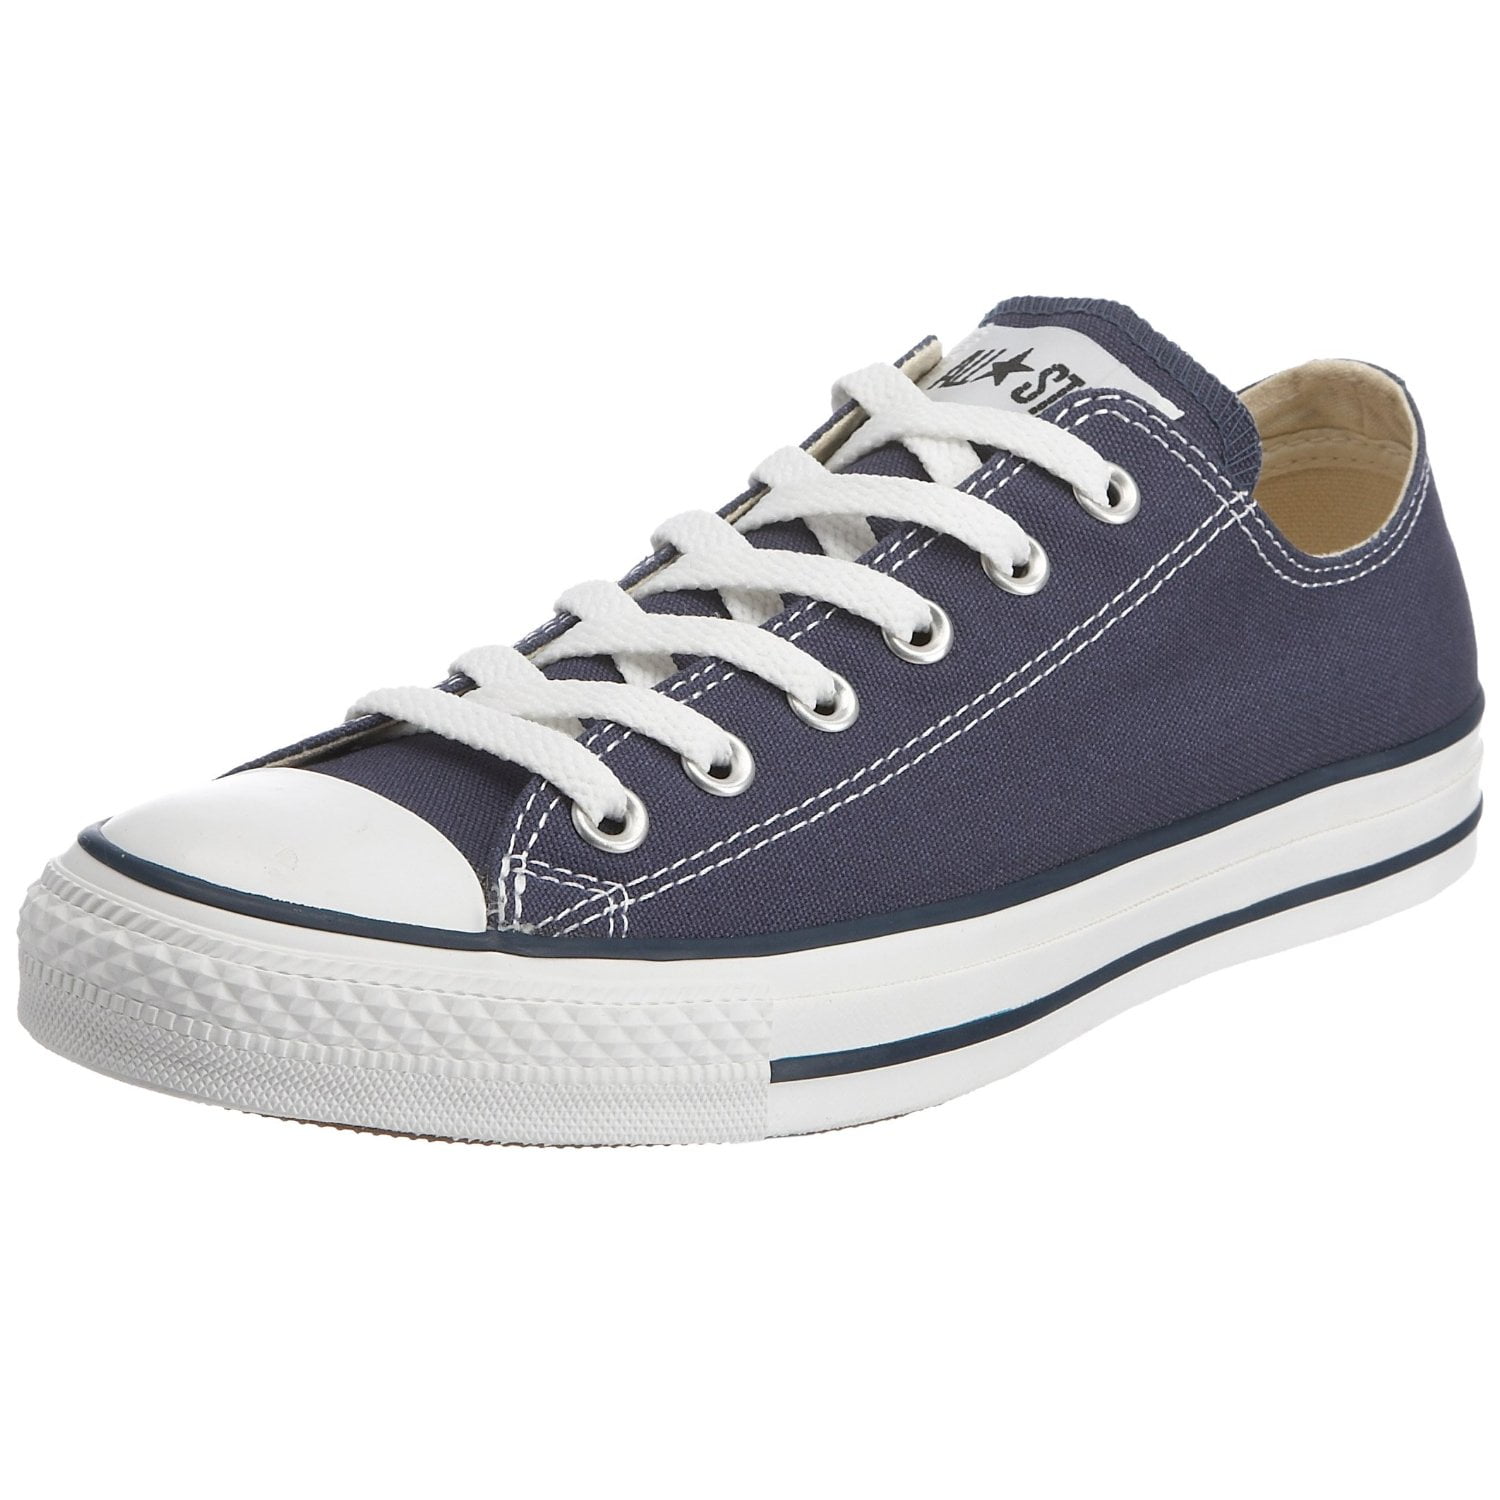 lokalisere Sparsommelig synge Converse Unisex Chuck low Fashion-Sneakers, Navy, 12.5 - Walmart.com